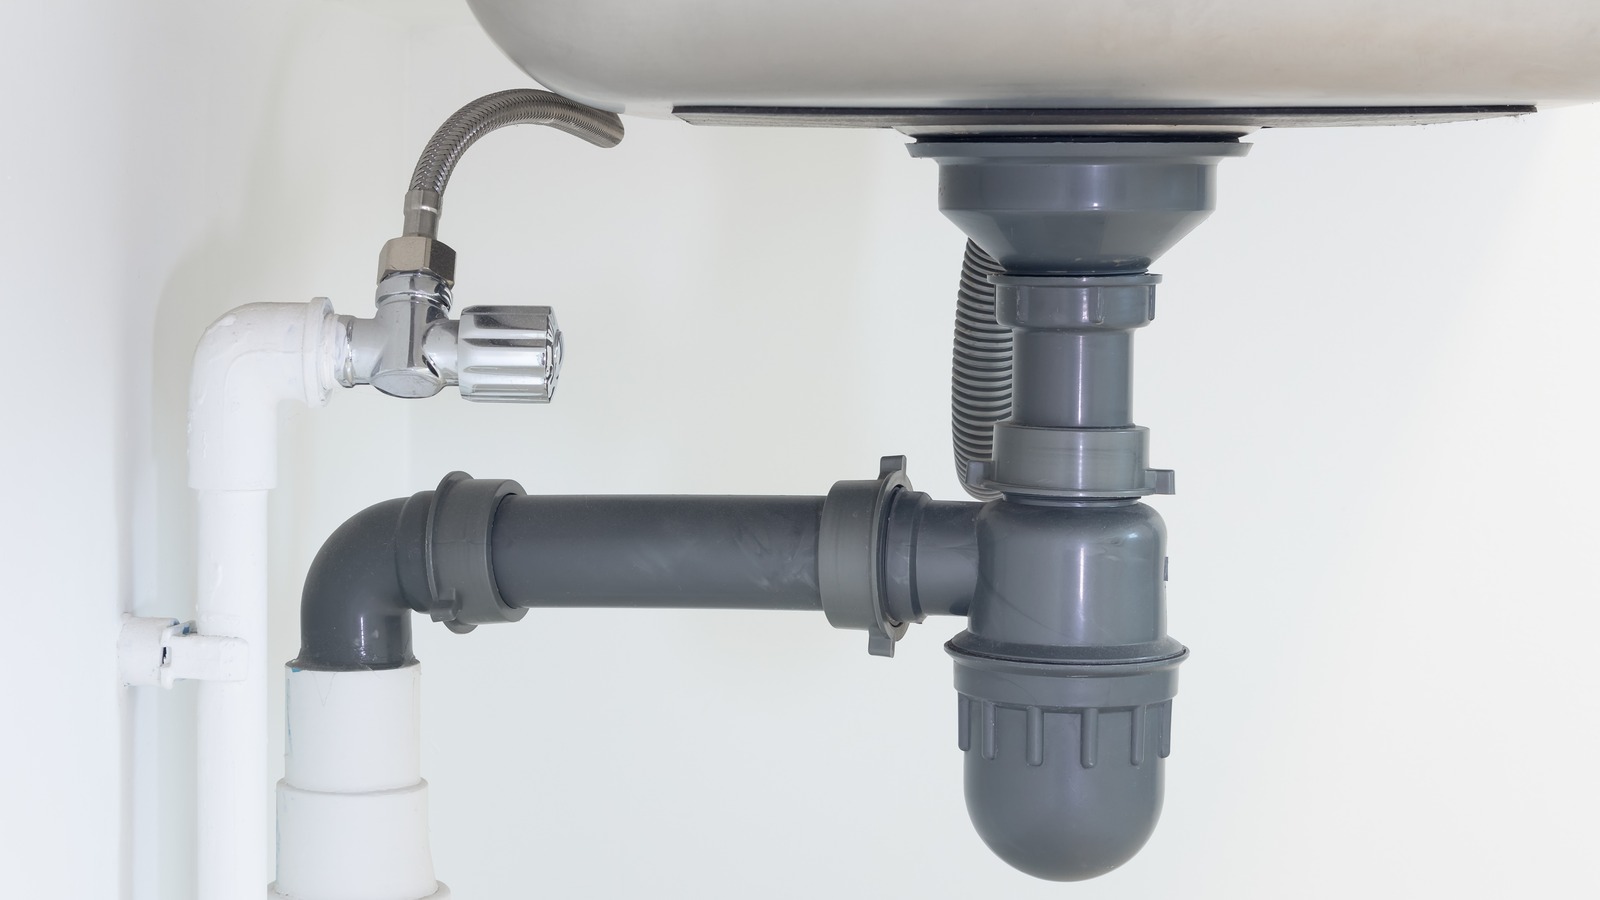 https://www.housedigest.com/img/gallery/how-to-install-a-kitchen-sink-drain/l-intro-1652799891.jpg